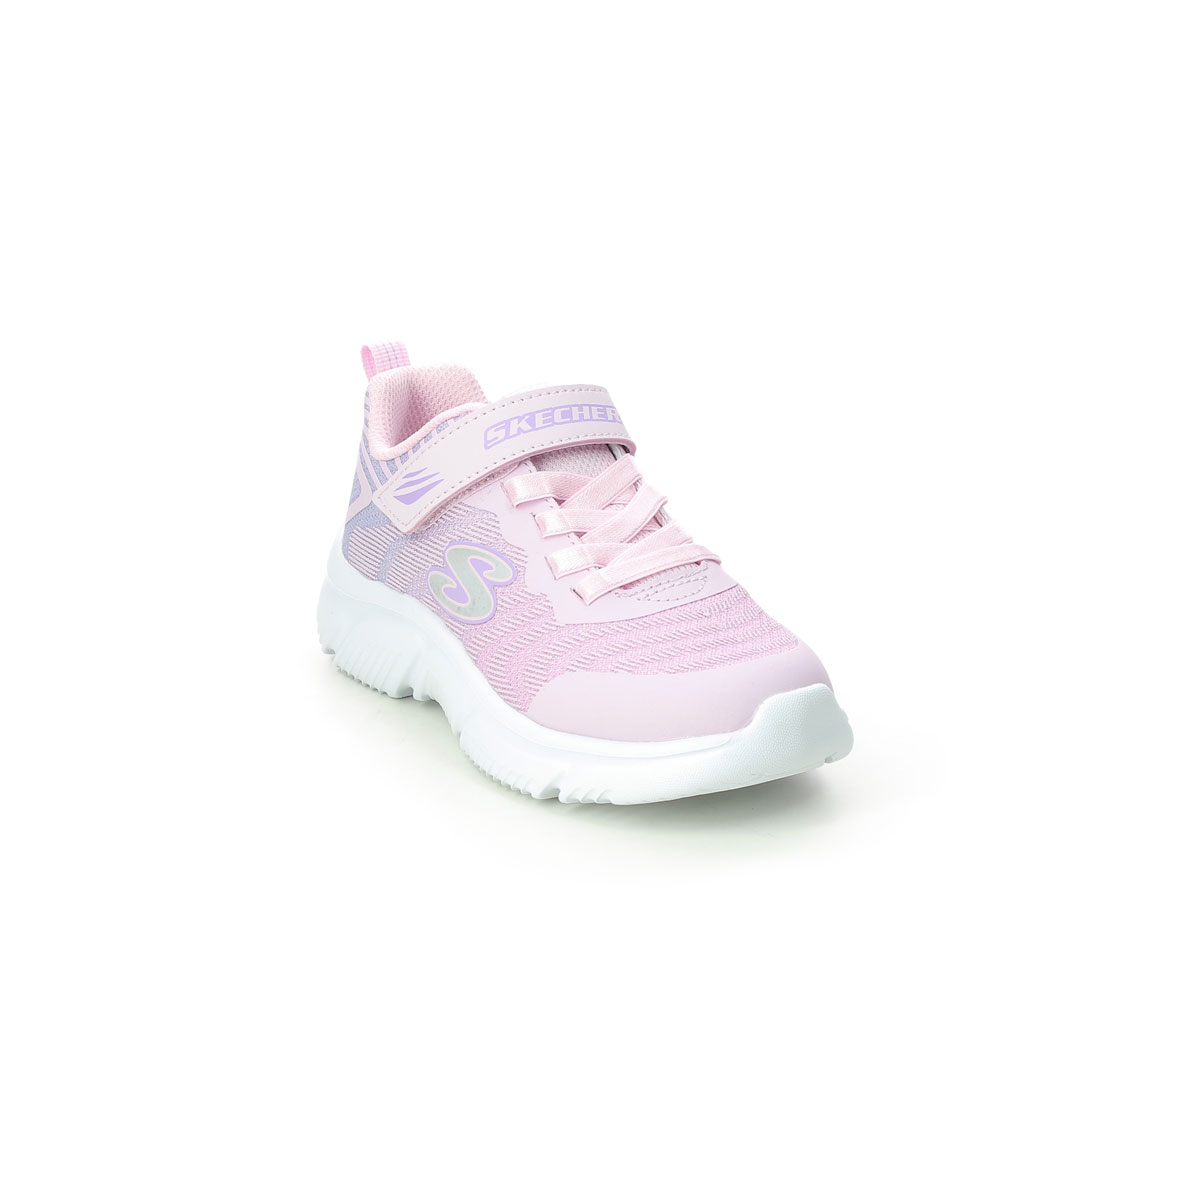 Skechers Go Run 650 Bungee PKLV Pink Lavender Kids girls trainers 302478L in a Plain Man-made in Size 31